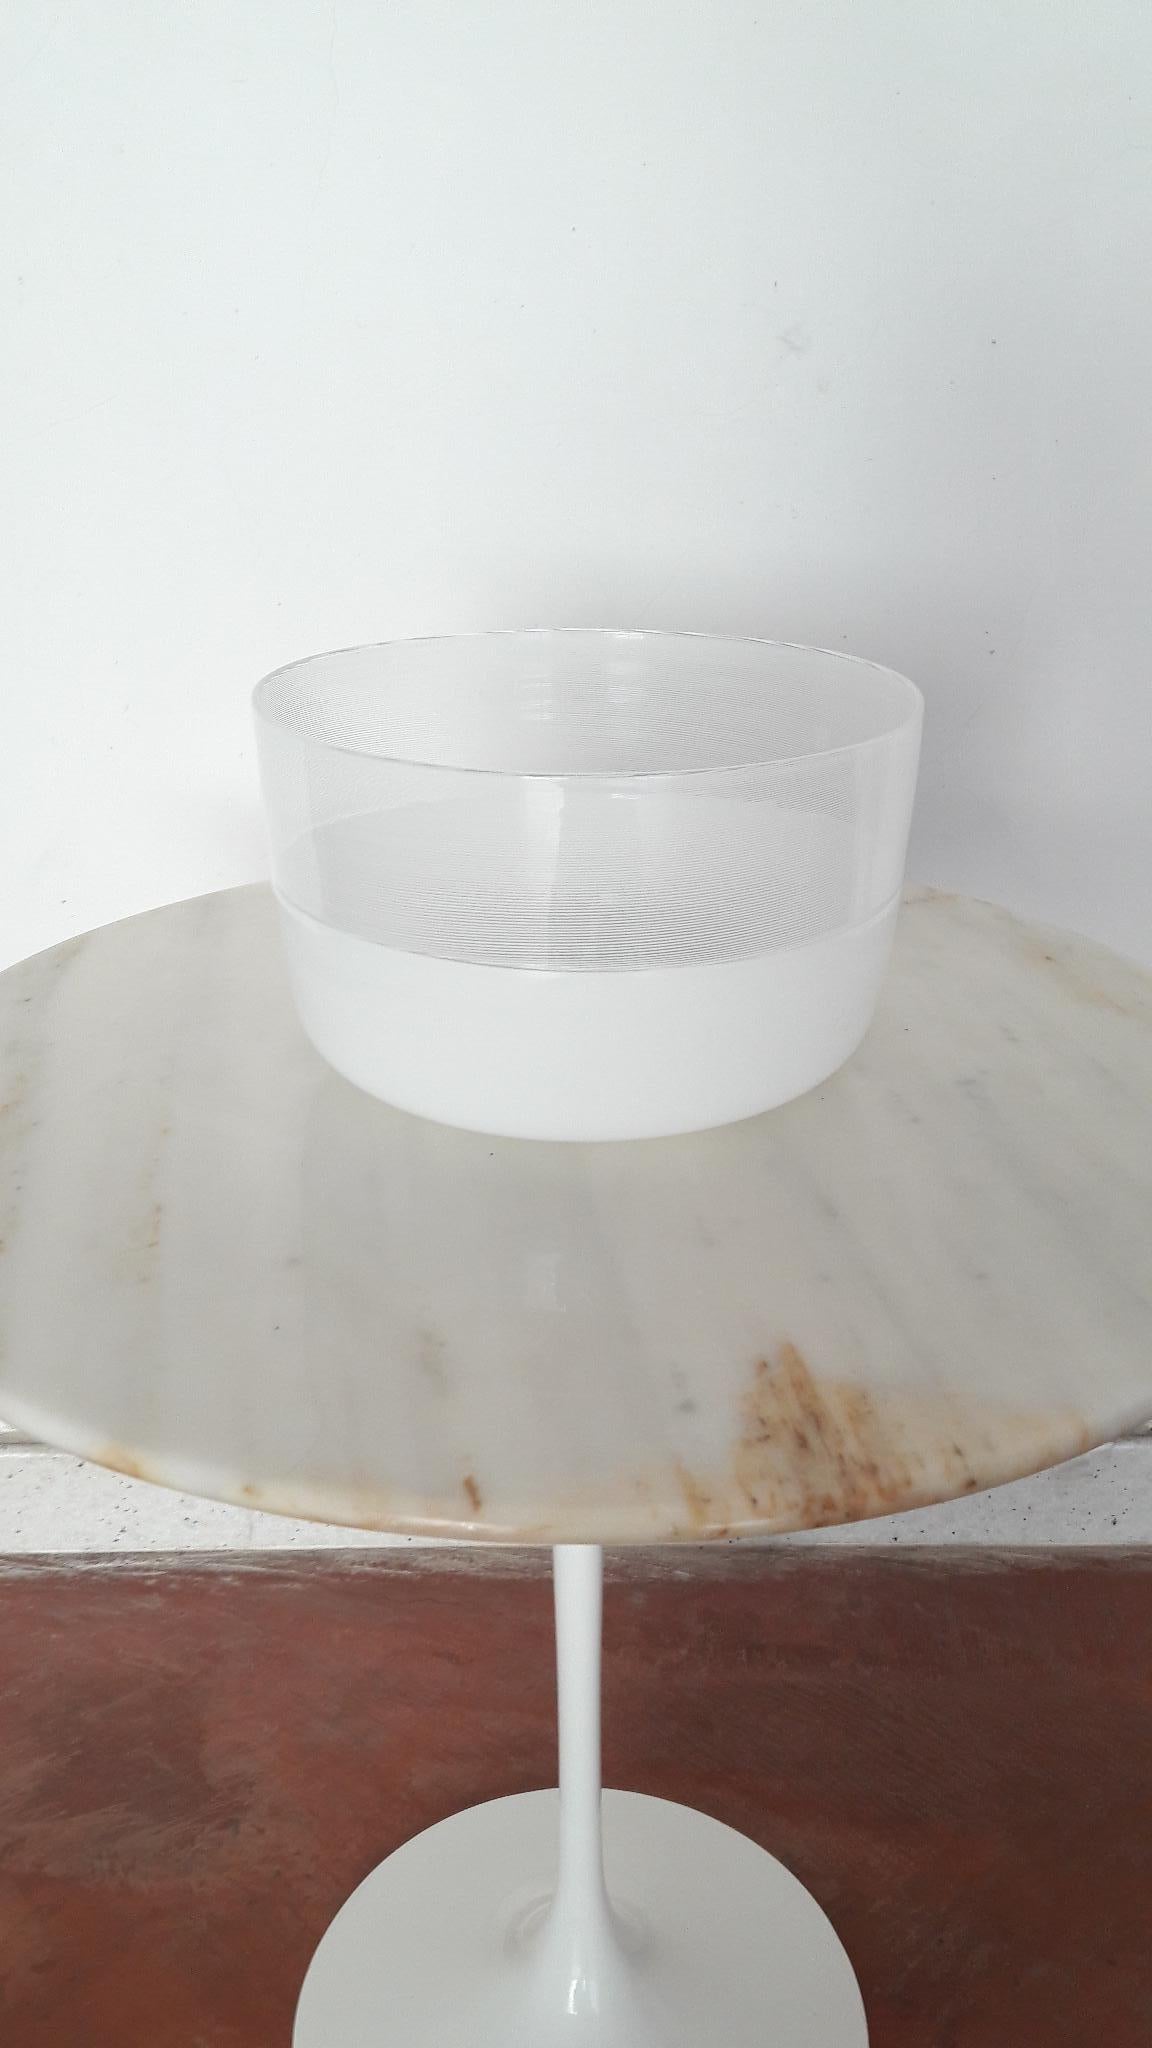 An elegant art-glass bowl designed by Tapio Wirkkala in 1970s and manufactured in Italy by Venini in 1980.
White-milk centerpiece with the upper part made in ‘Filigree’ and the lower part in ‘Opaline’ hand- blown glass with ’Incalmo’